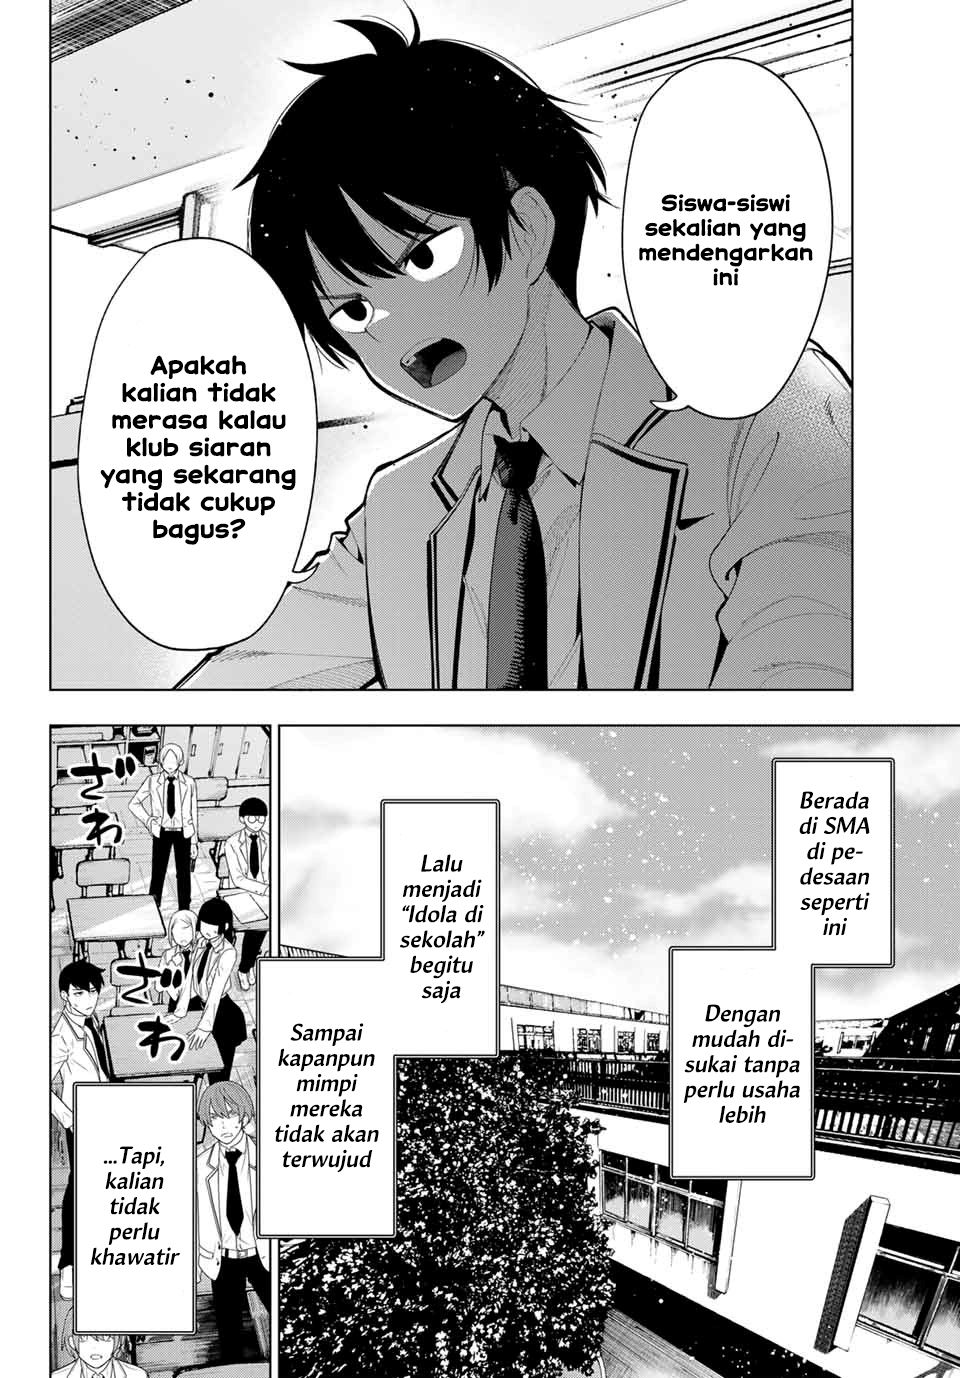 Mayonaka Heart Tune (Tune In to the Midnight Heart) Chapter 02 Image 37